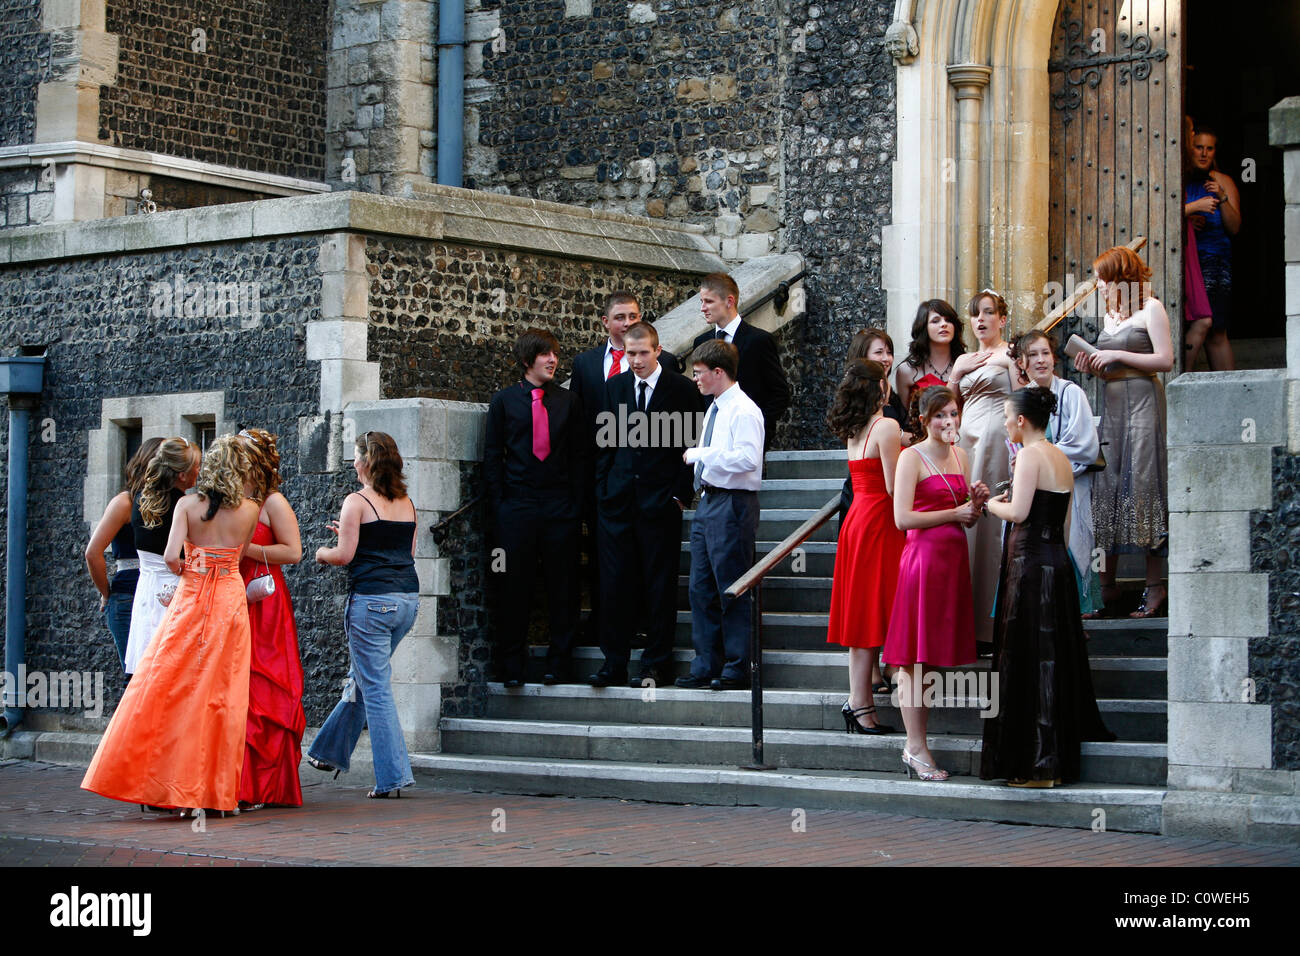 Young teenagers dressed up for a prom party, Canterbury, Kent, England, UK. Stock Photo